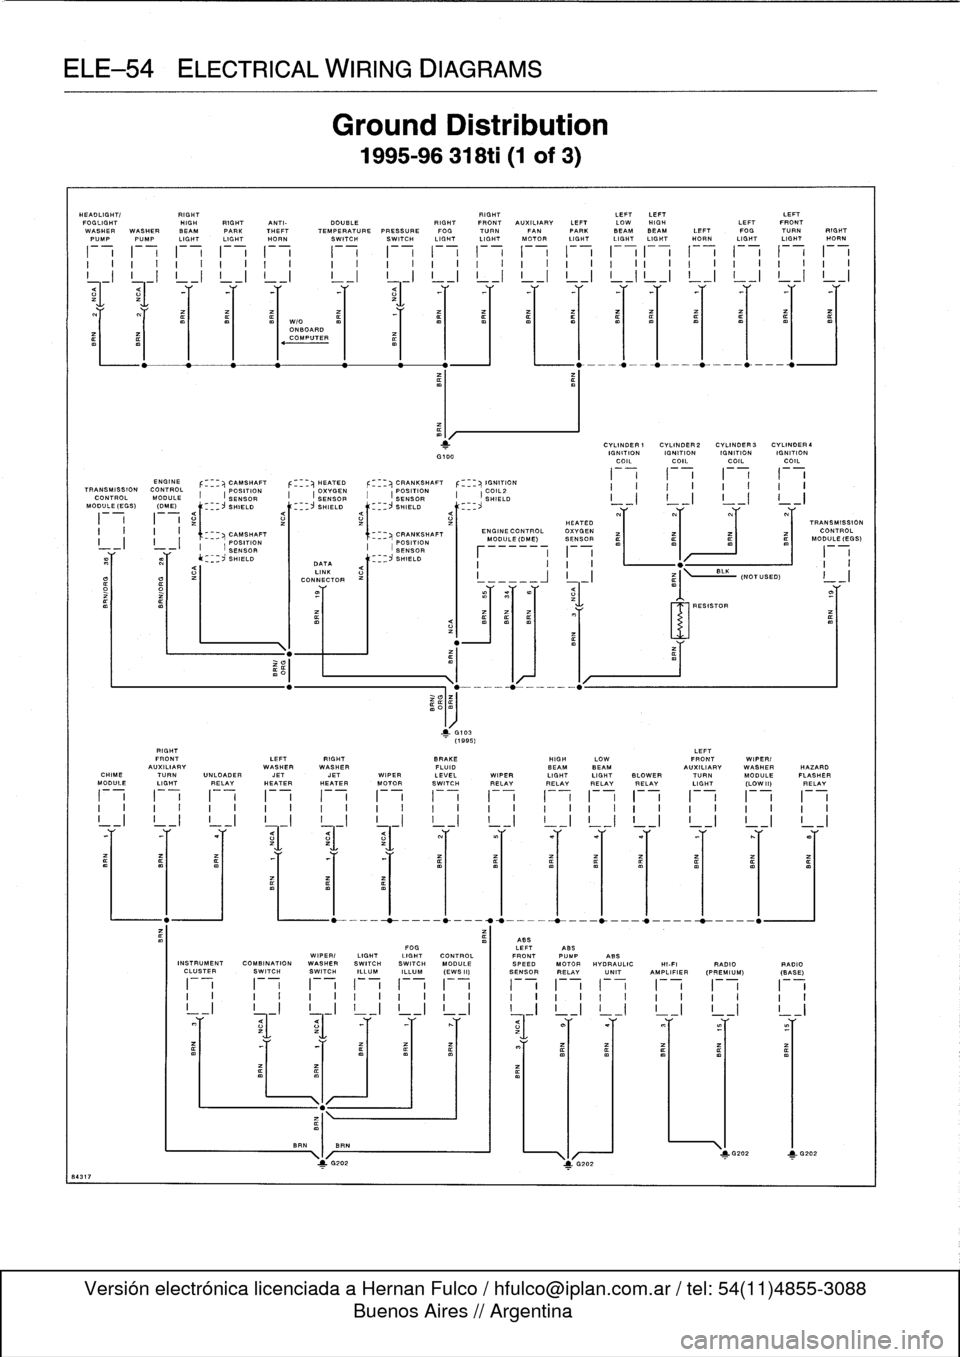 BMW 328i 1997 E36 Service Manual 
ELE-54
ELECTRICAL
WIRING
DIAGRAMS

HEADLIGHT/

	

RIGHT

	

RIGHT

	

LEFTLEFT

	

LEFT
FOGLIGHT

	

HIGH
RIGHT
ANTI-

	

DOUBLE

	

RIGHT
FRONT
AUXILIARY
LEFT
LOW
HIGH

	

LEFT
FRONT
WASHER
WASHER
B